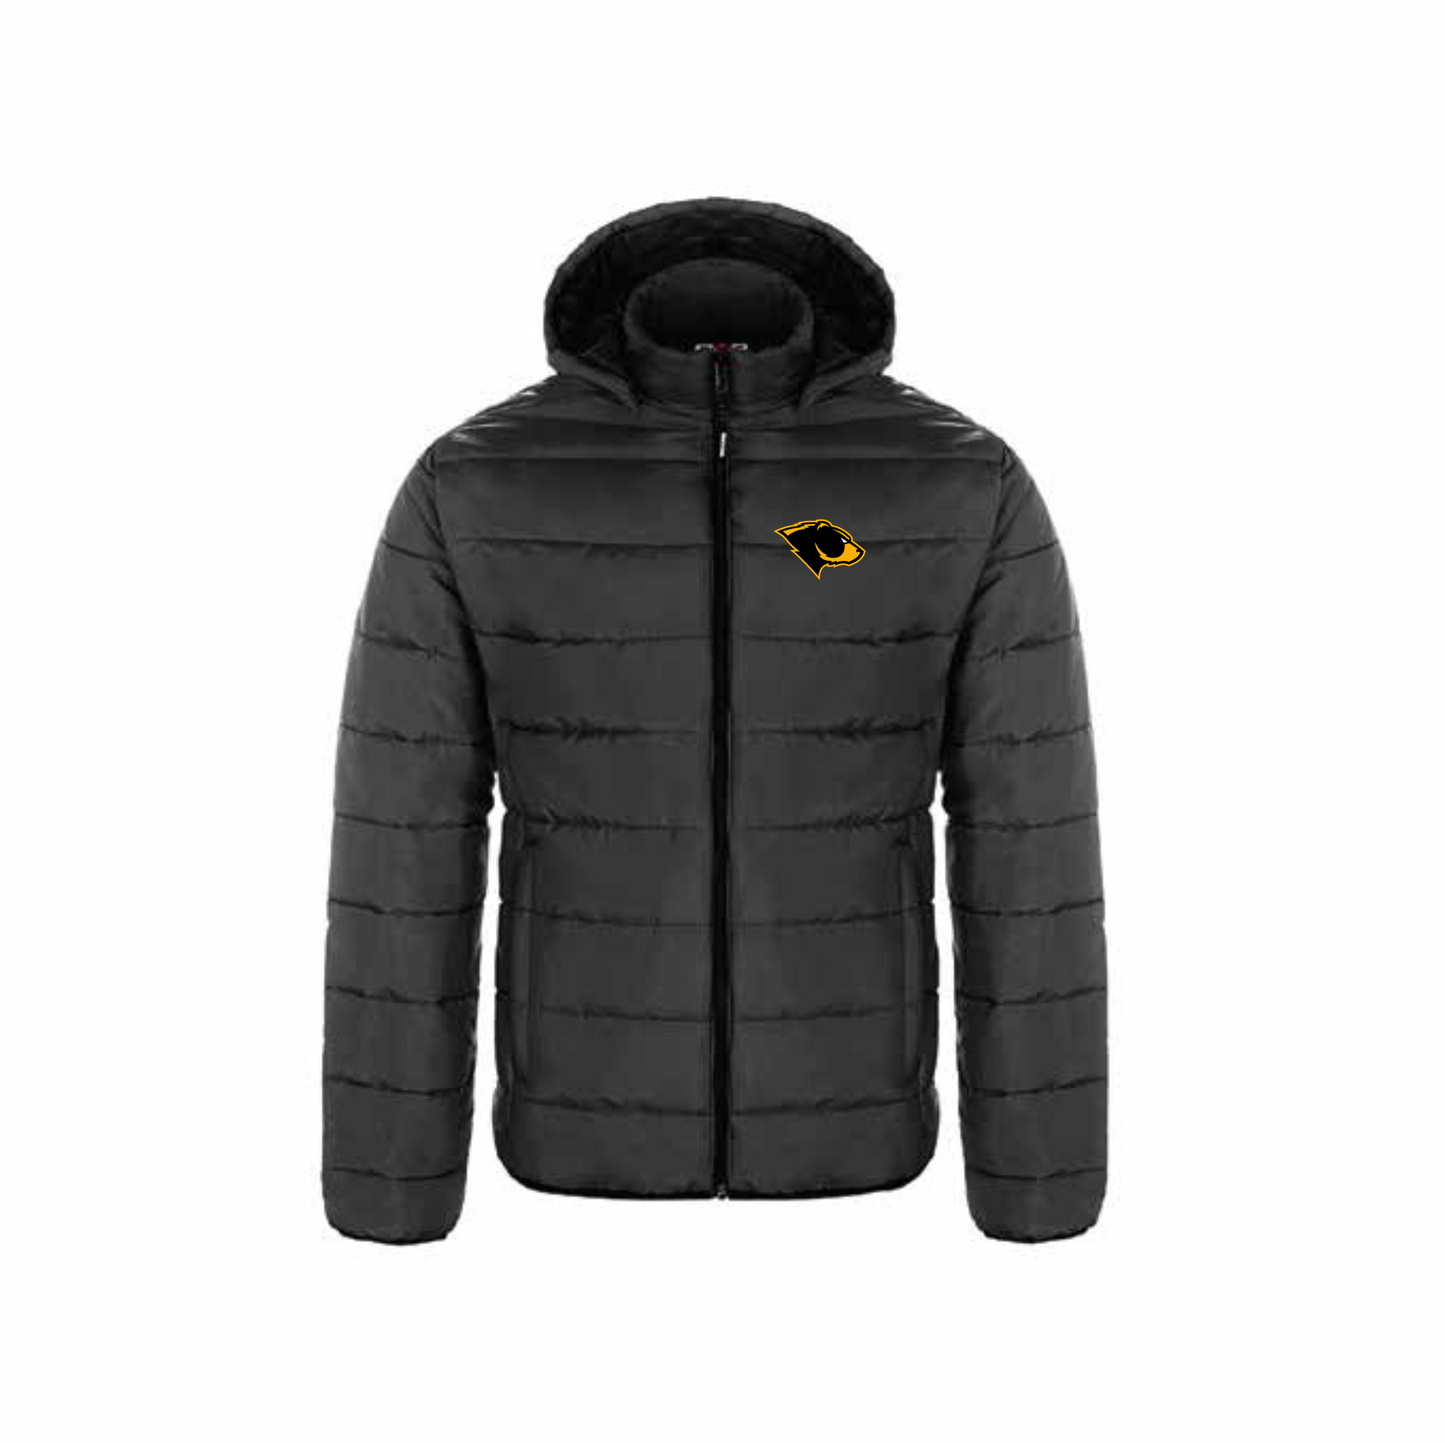 ORDER BY OCT 6th, Ships week of NOV 7th - Oakland Bears Glacial Midweight Puffer Jacket - Men's